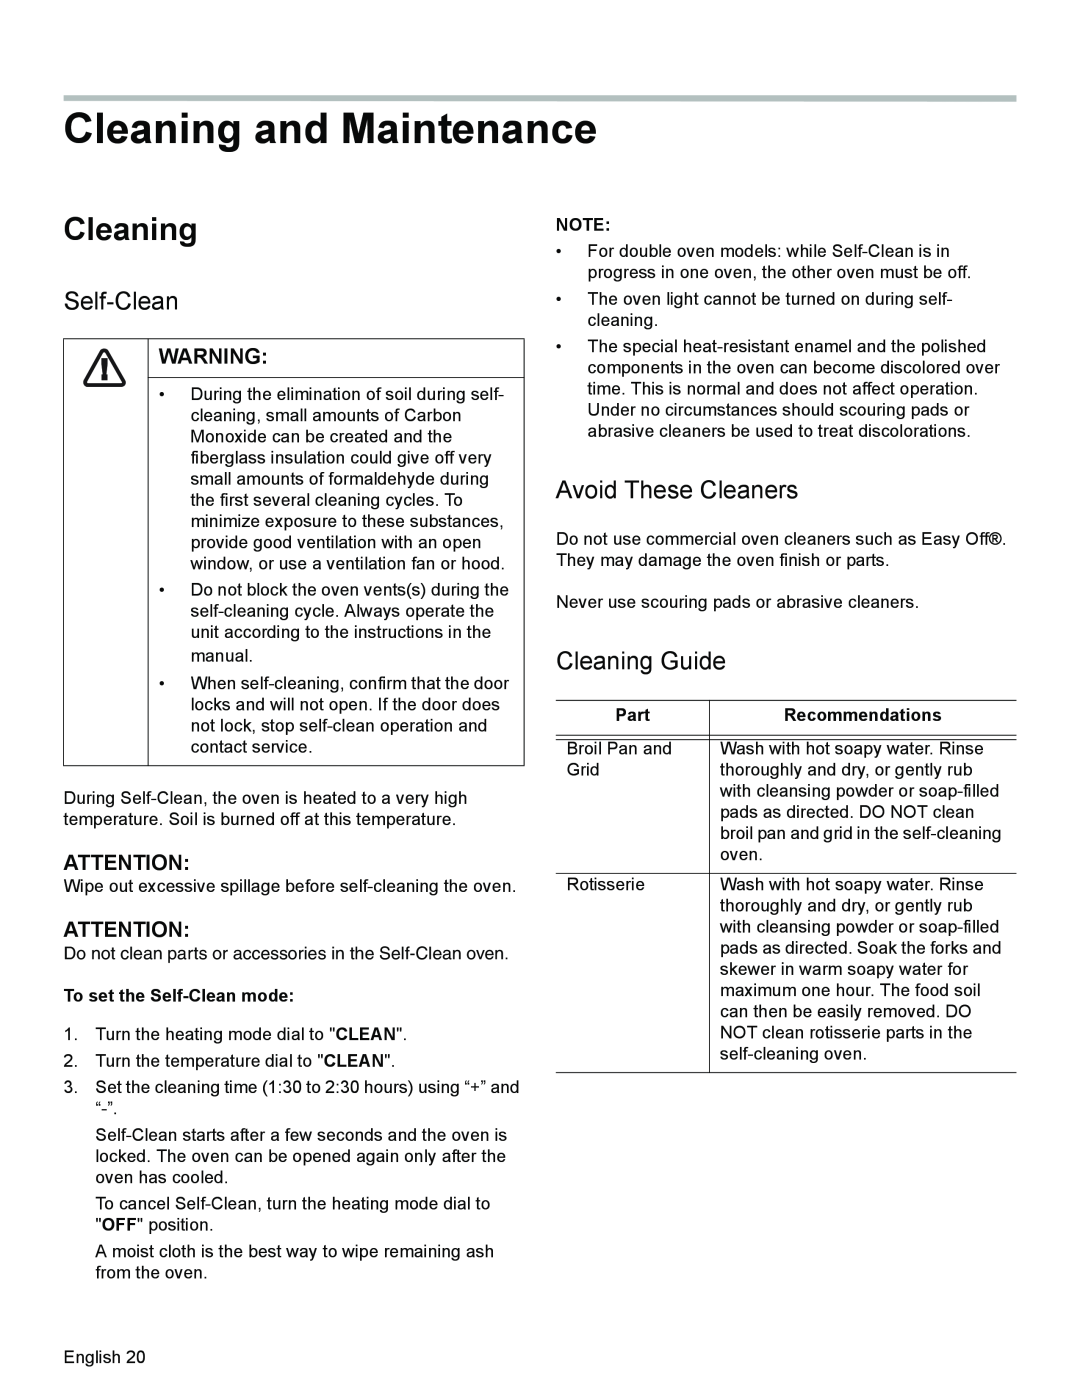 Thermador PODMW301 Cleaning and Maintenance, Avoid These Cleaners, Cleaning Guide, To set the Self-Cleanmode, Part 